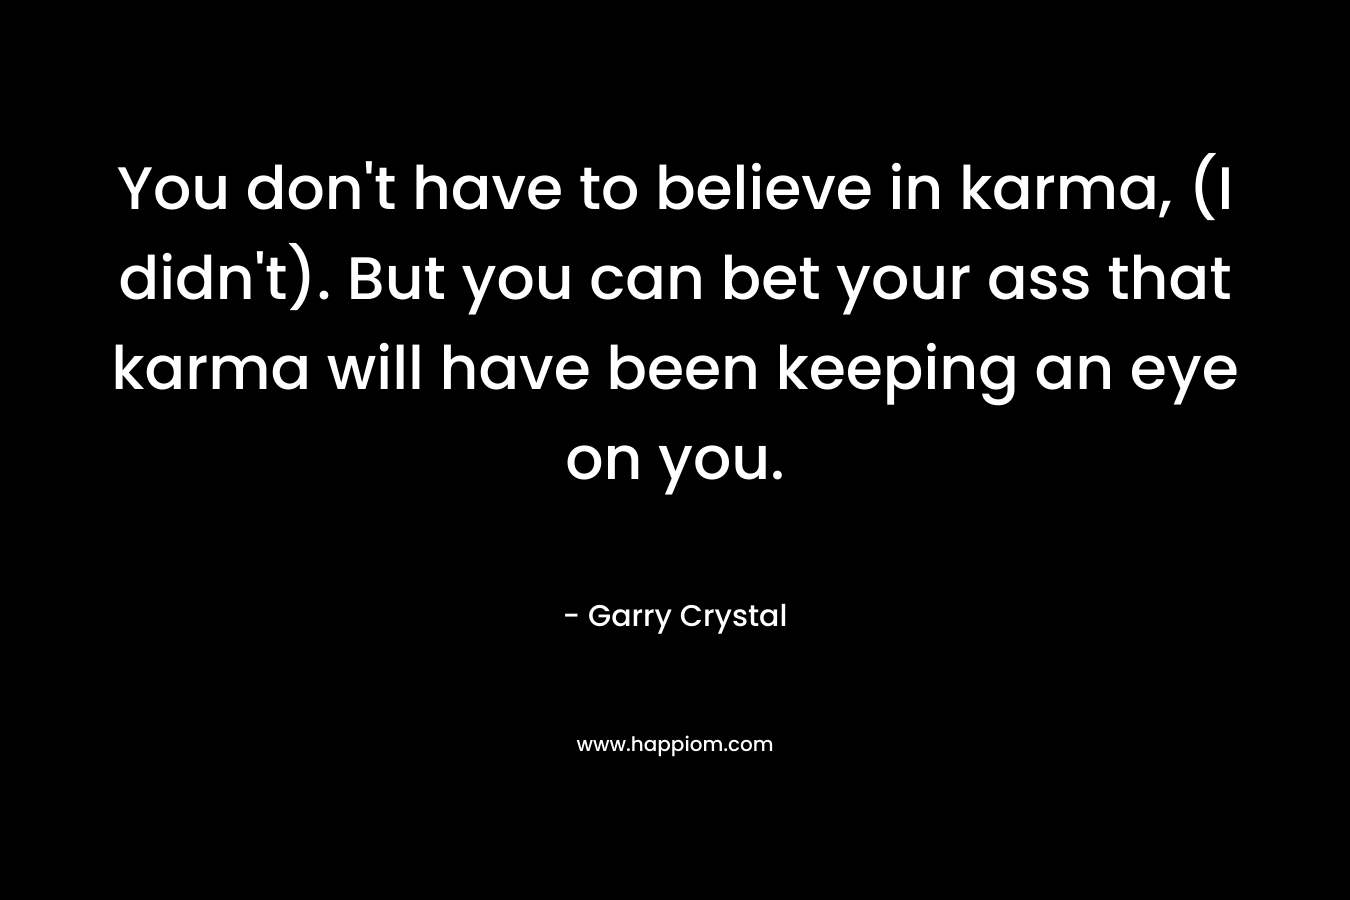 You don't have to believe in karma, (I didn't). But you can bet your ass that karma will have been keeping an eye on you.